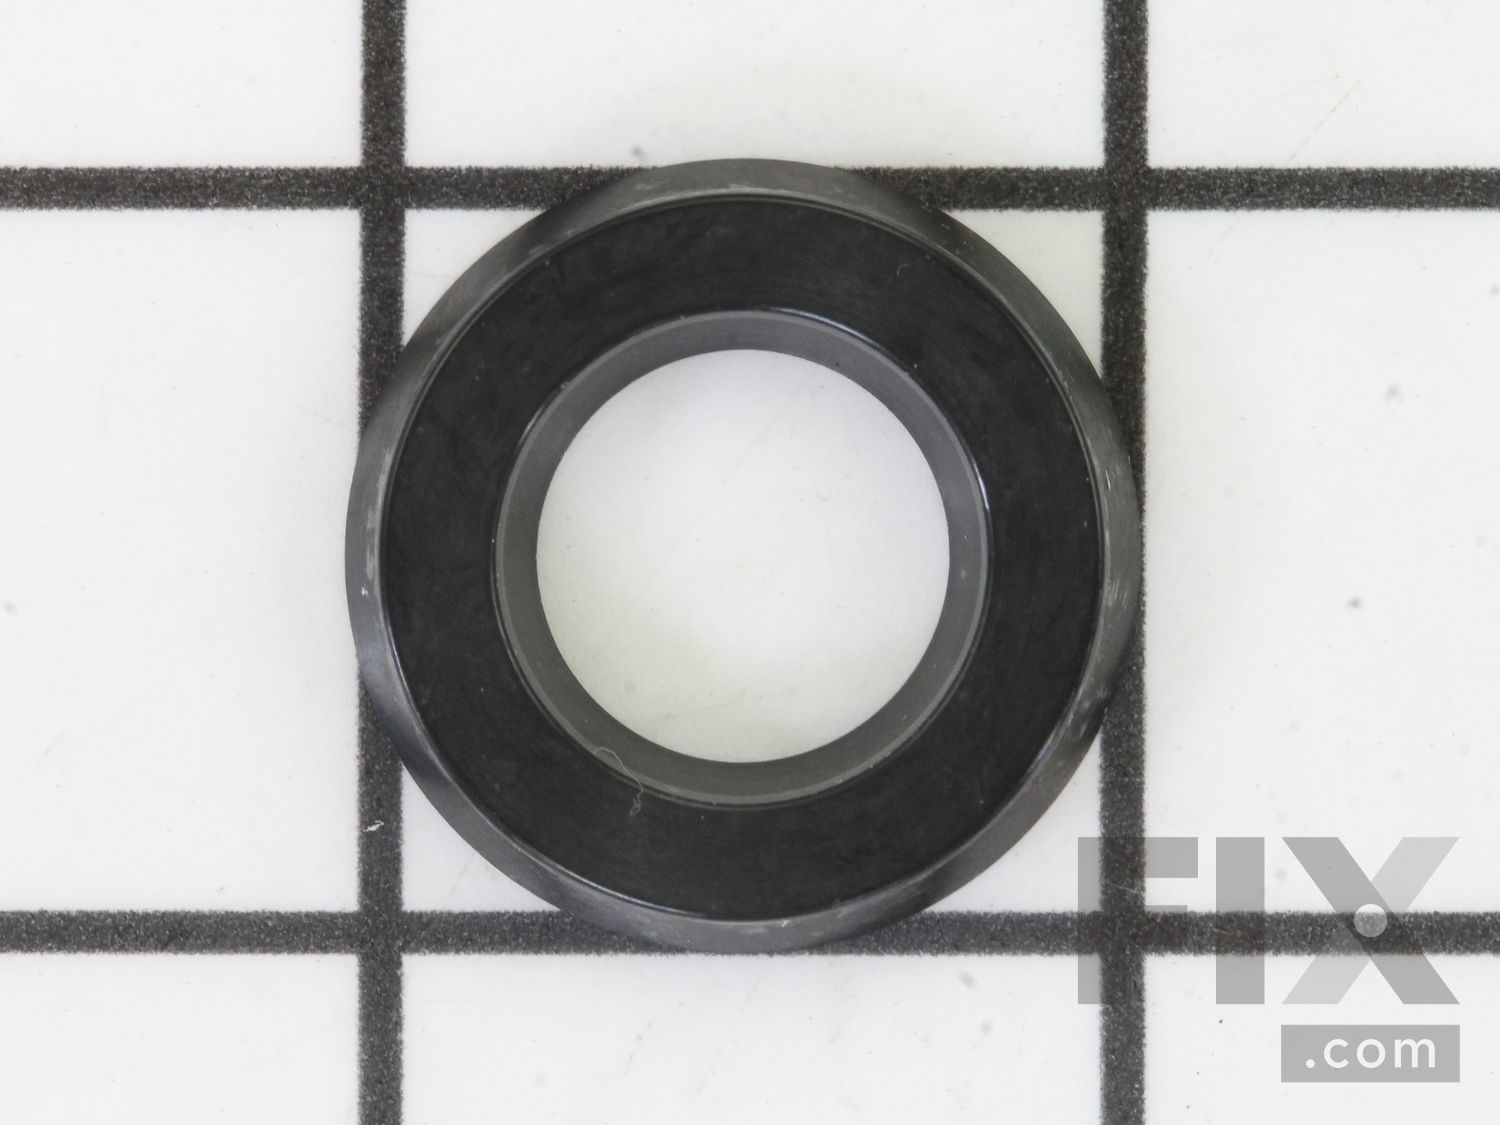 OEM Craftsman Pressure Washer Seal [93667GS] | Ships Today | Fix.com